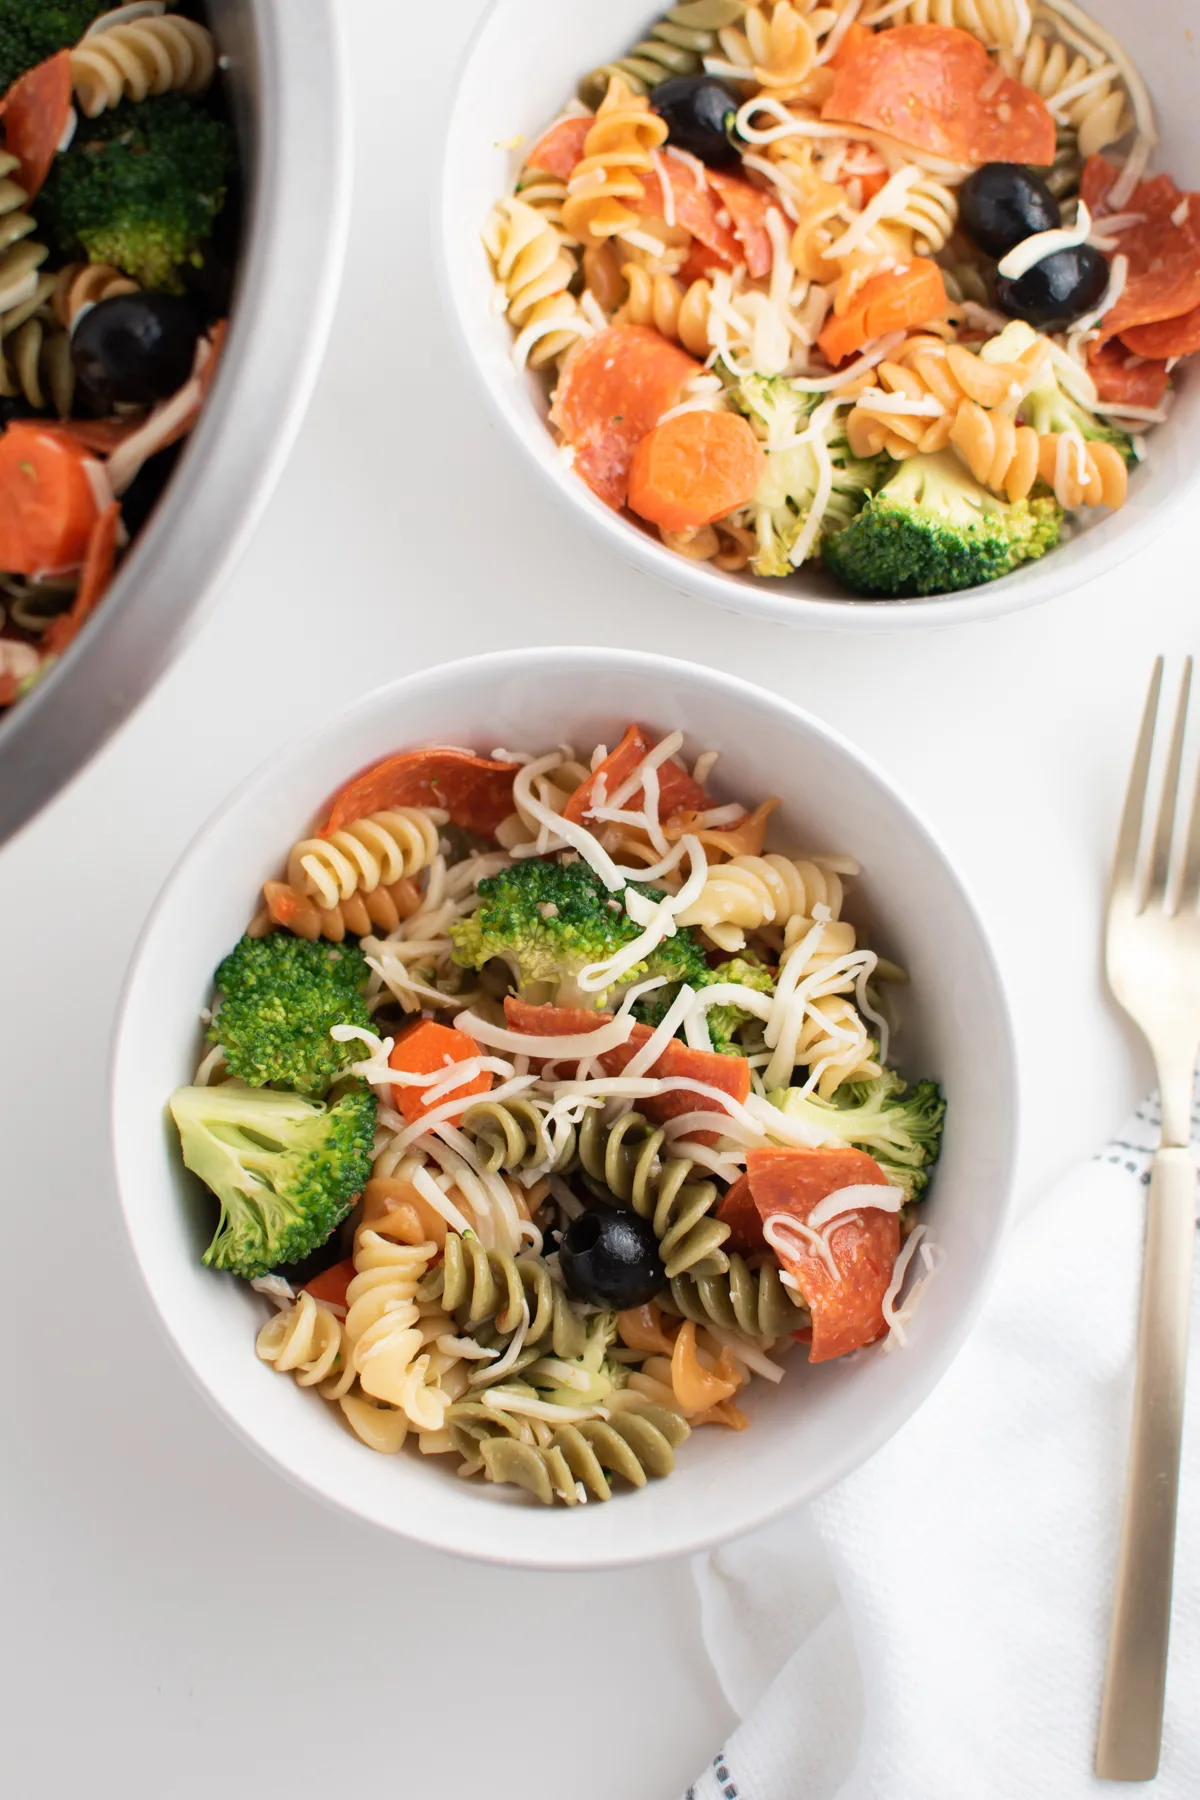 Tri color pasta salad with Italian dressing in white bowls with fork.